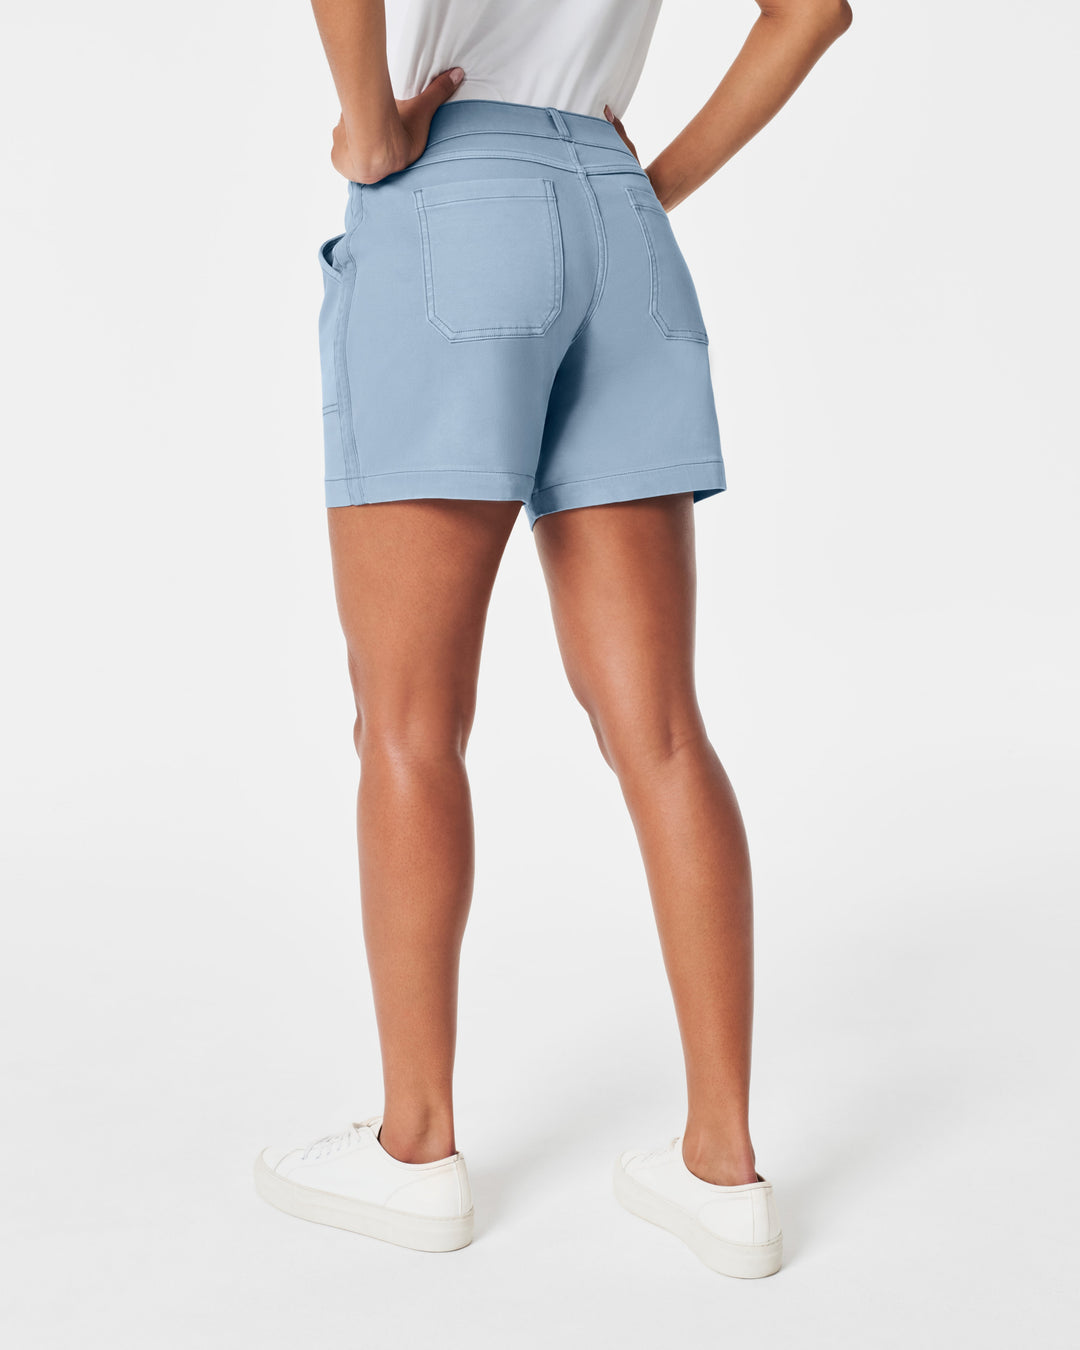 Spanx Stretch Twill 6" Shorts in Mountain Blue